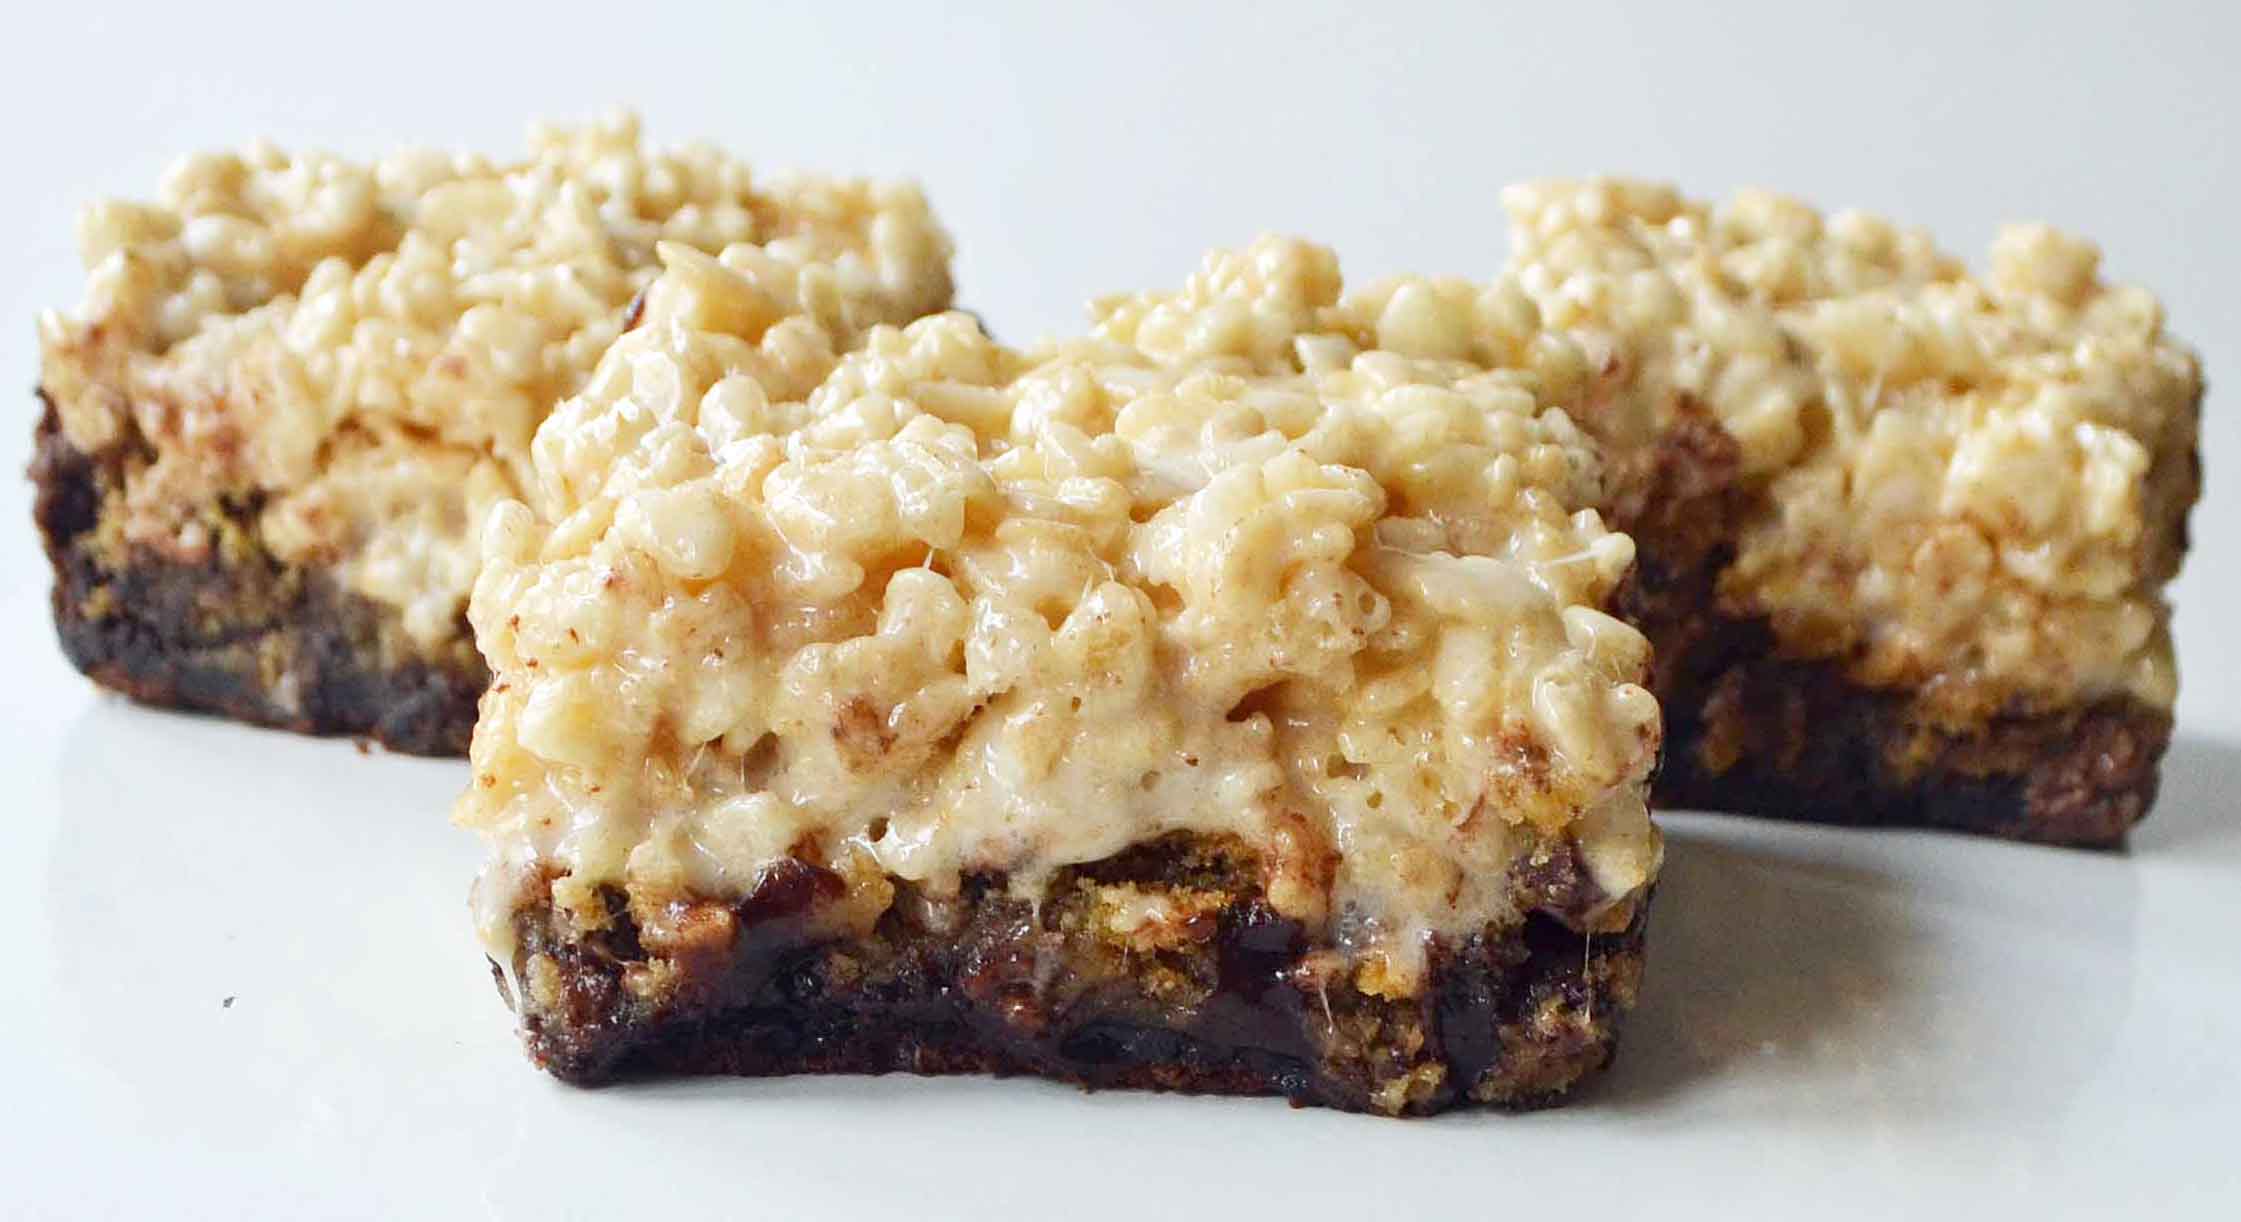 Bake Sale Trifecta Bars are a decadent chocolate brownie, classic chocolate chip cookies, and buttery soft rice krispies treat all in one. It is three favorite treats all in one bar! www.modernhoney.com